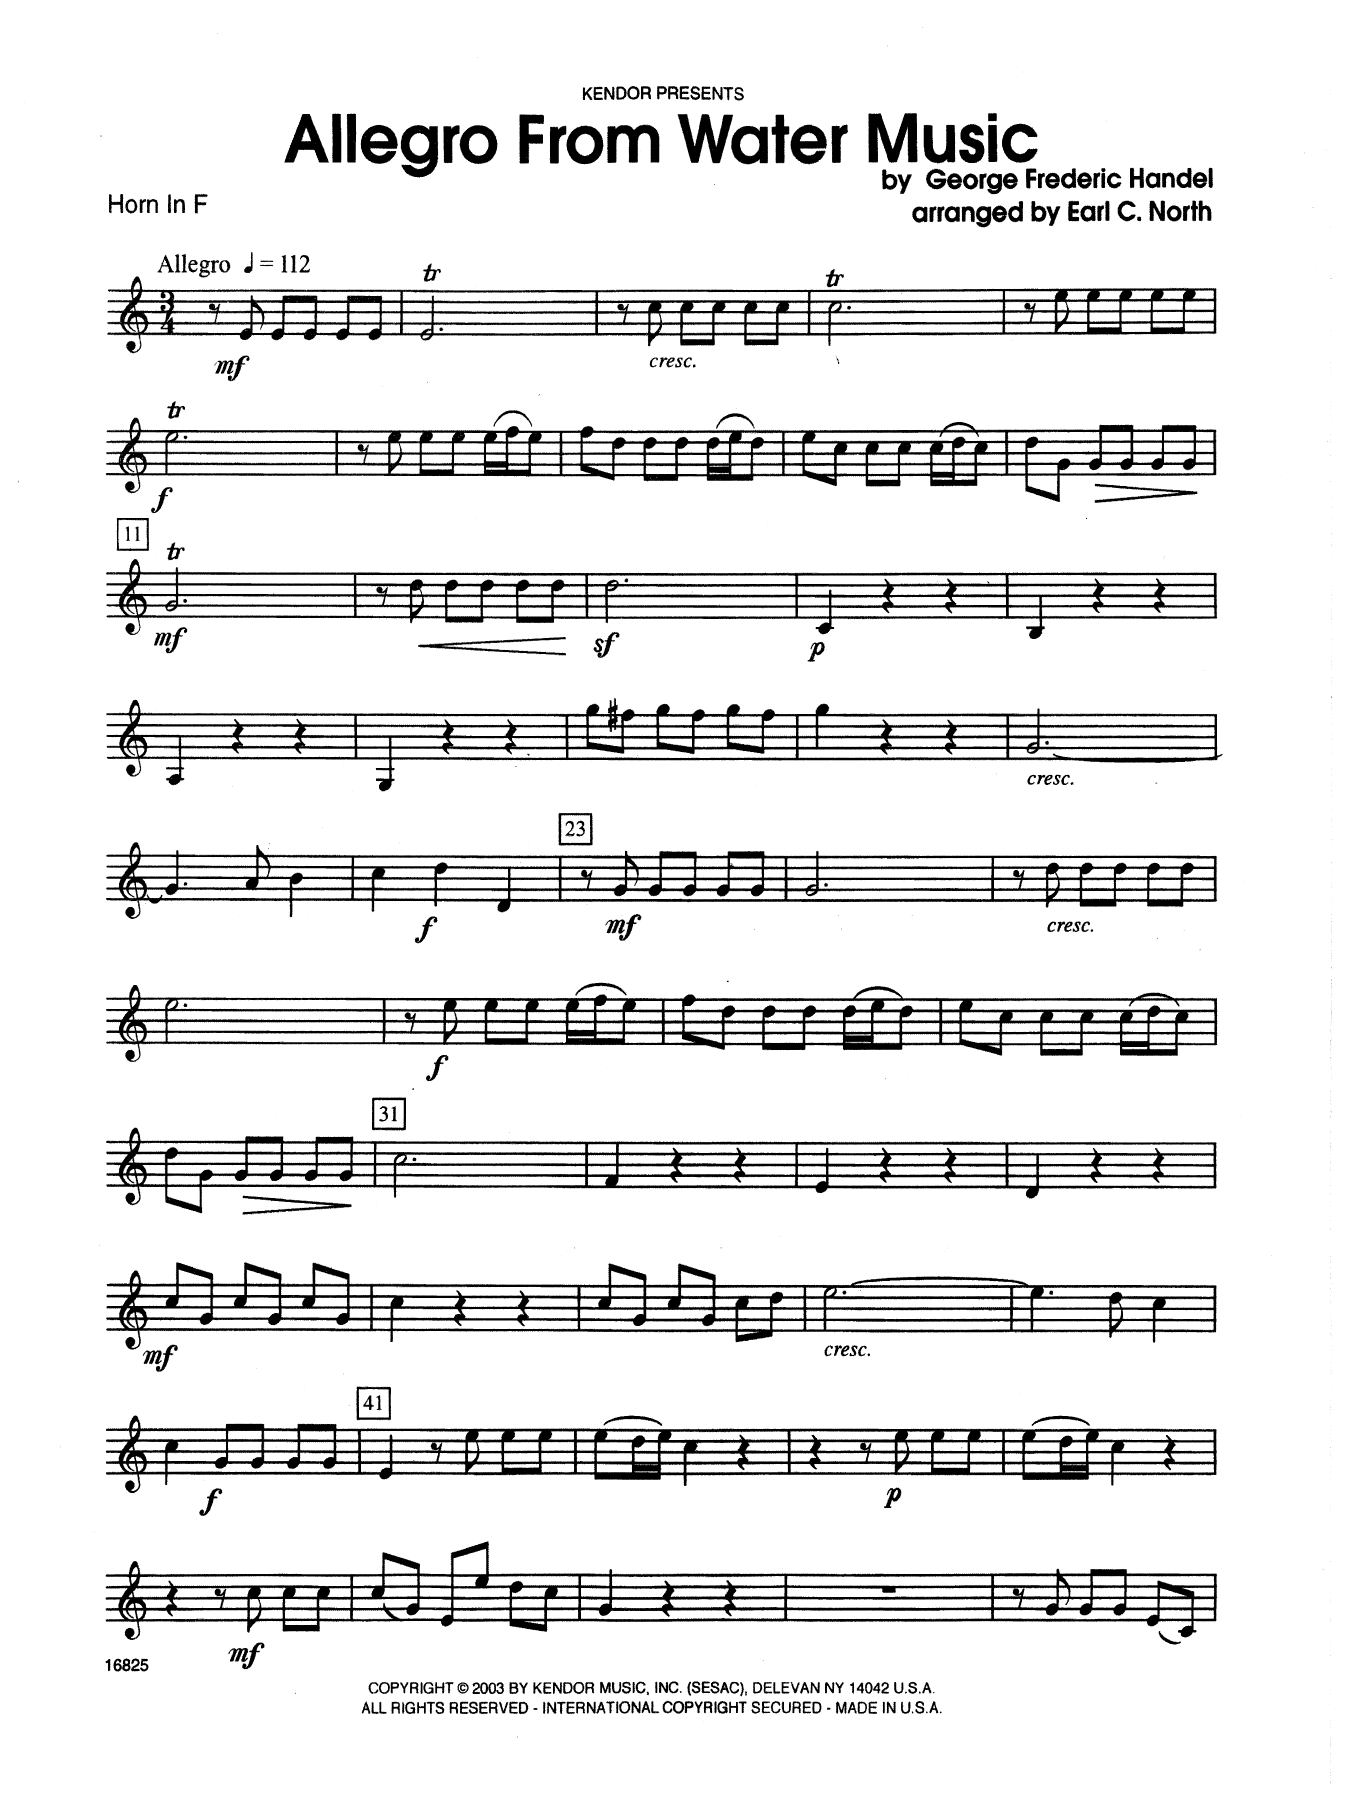 Earl North Allegro From Water Music - Horn in F sheet music notes and chords. Download Printable PDF.